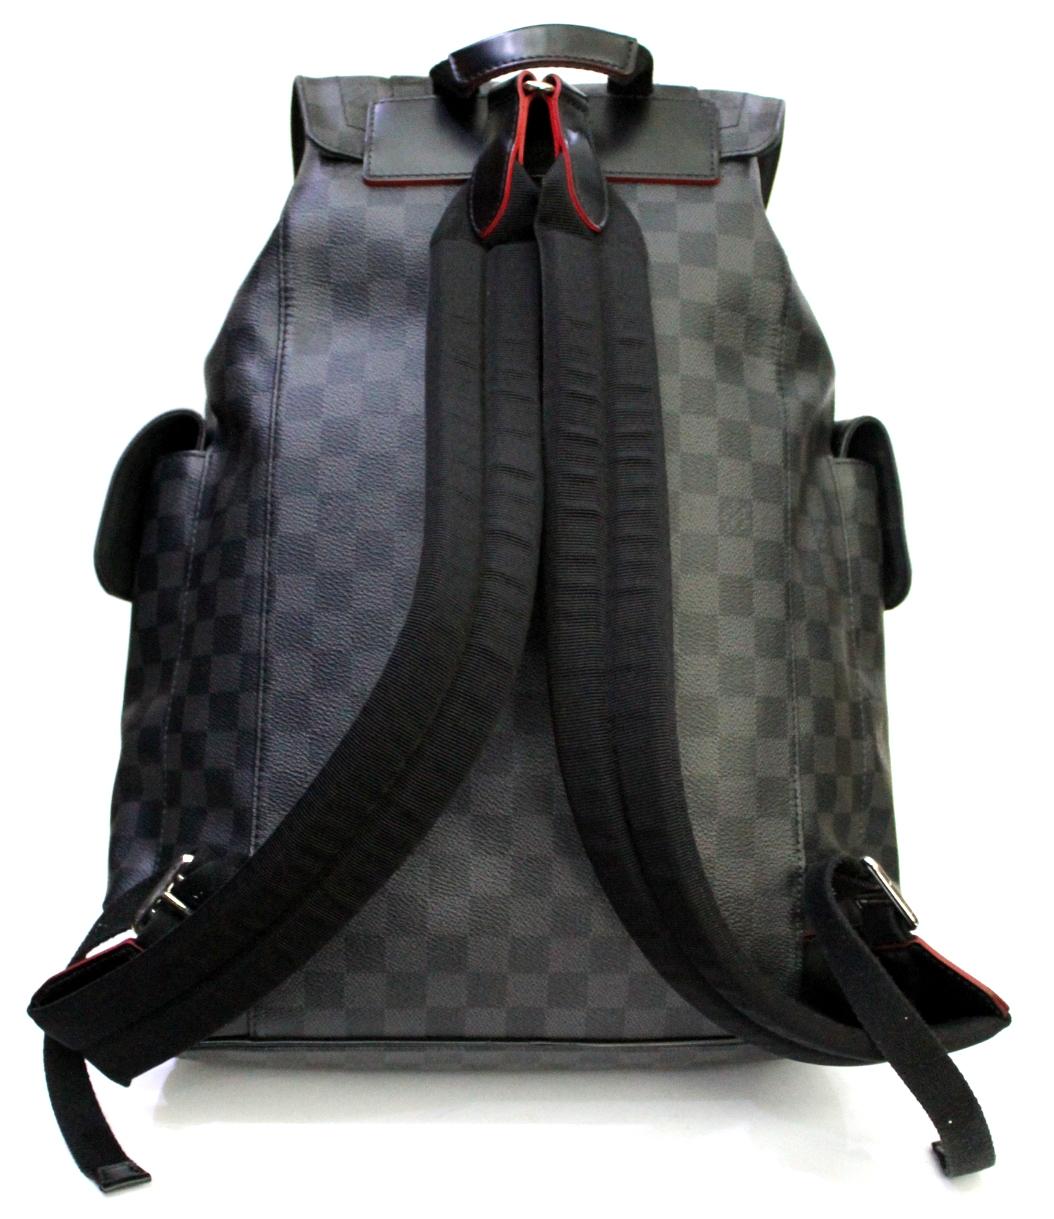 The sleek modern shape of the Christopher backpack looks truly elegant. The exterior features durable and sophisticated Damier Graphite canvas with black and red cowhide leather trimmings. Shiny silvertone pieces add an elegant look to this